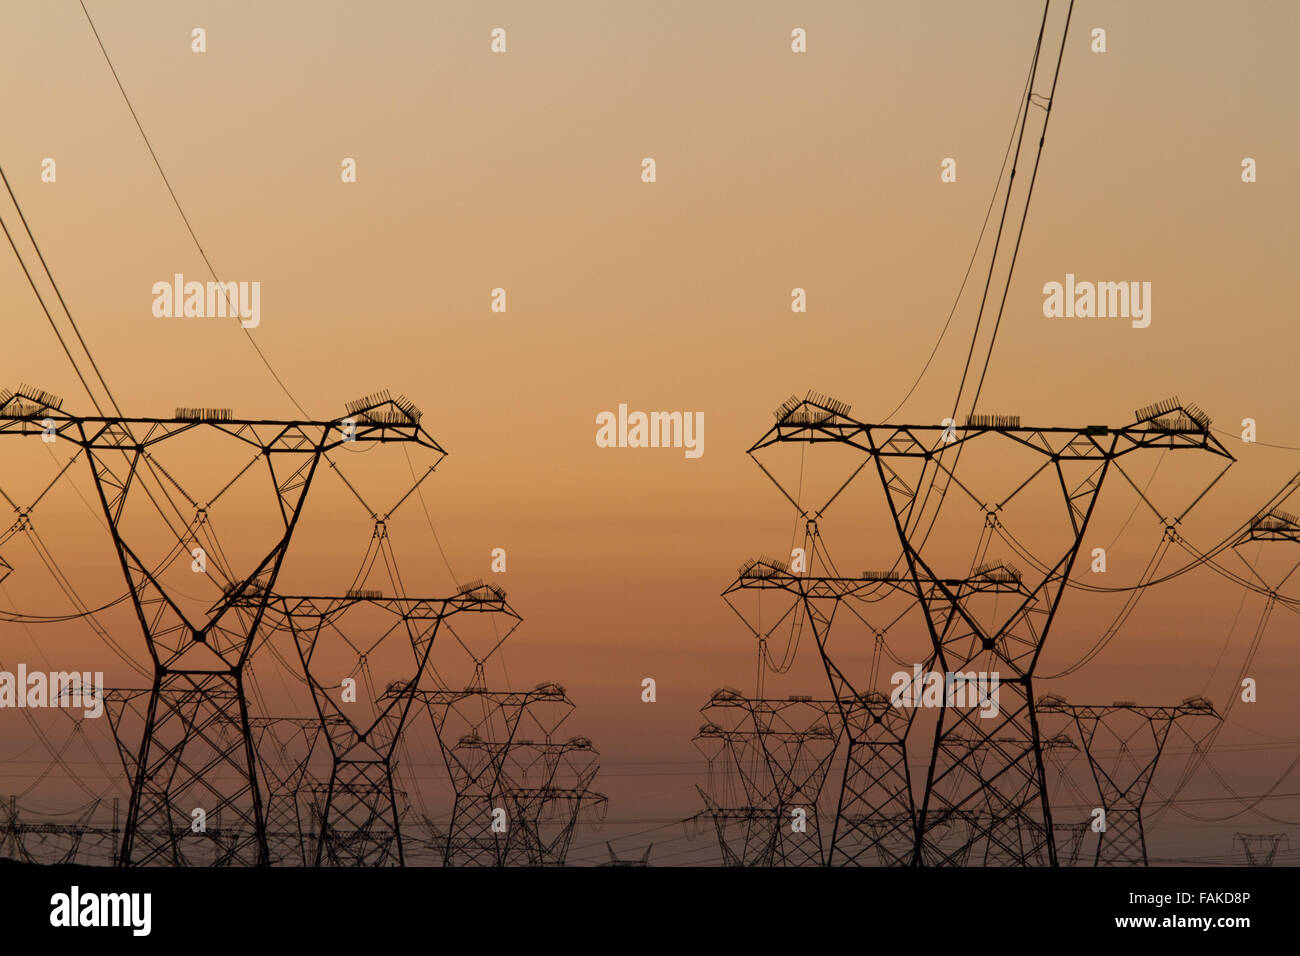 Electricity pylons at sunset Stock Photo